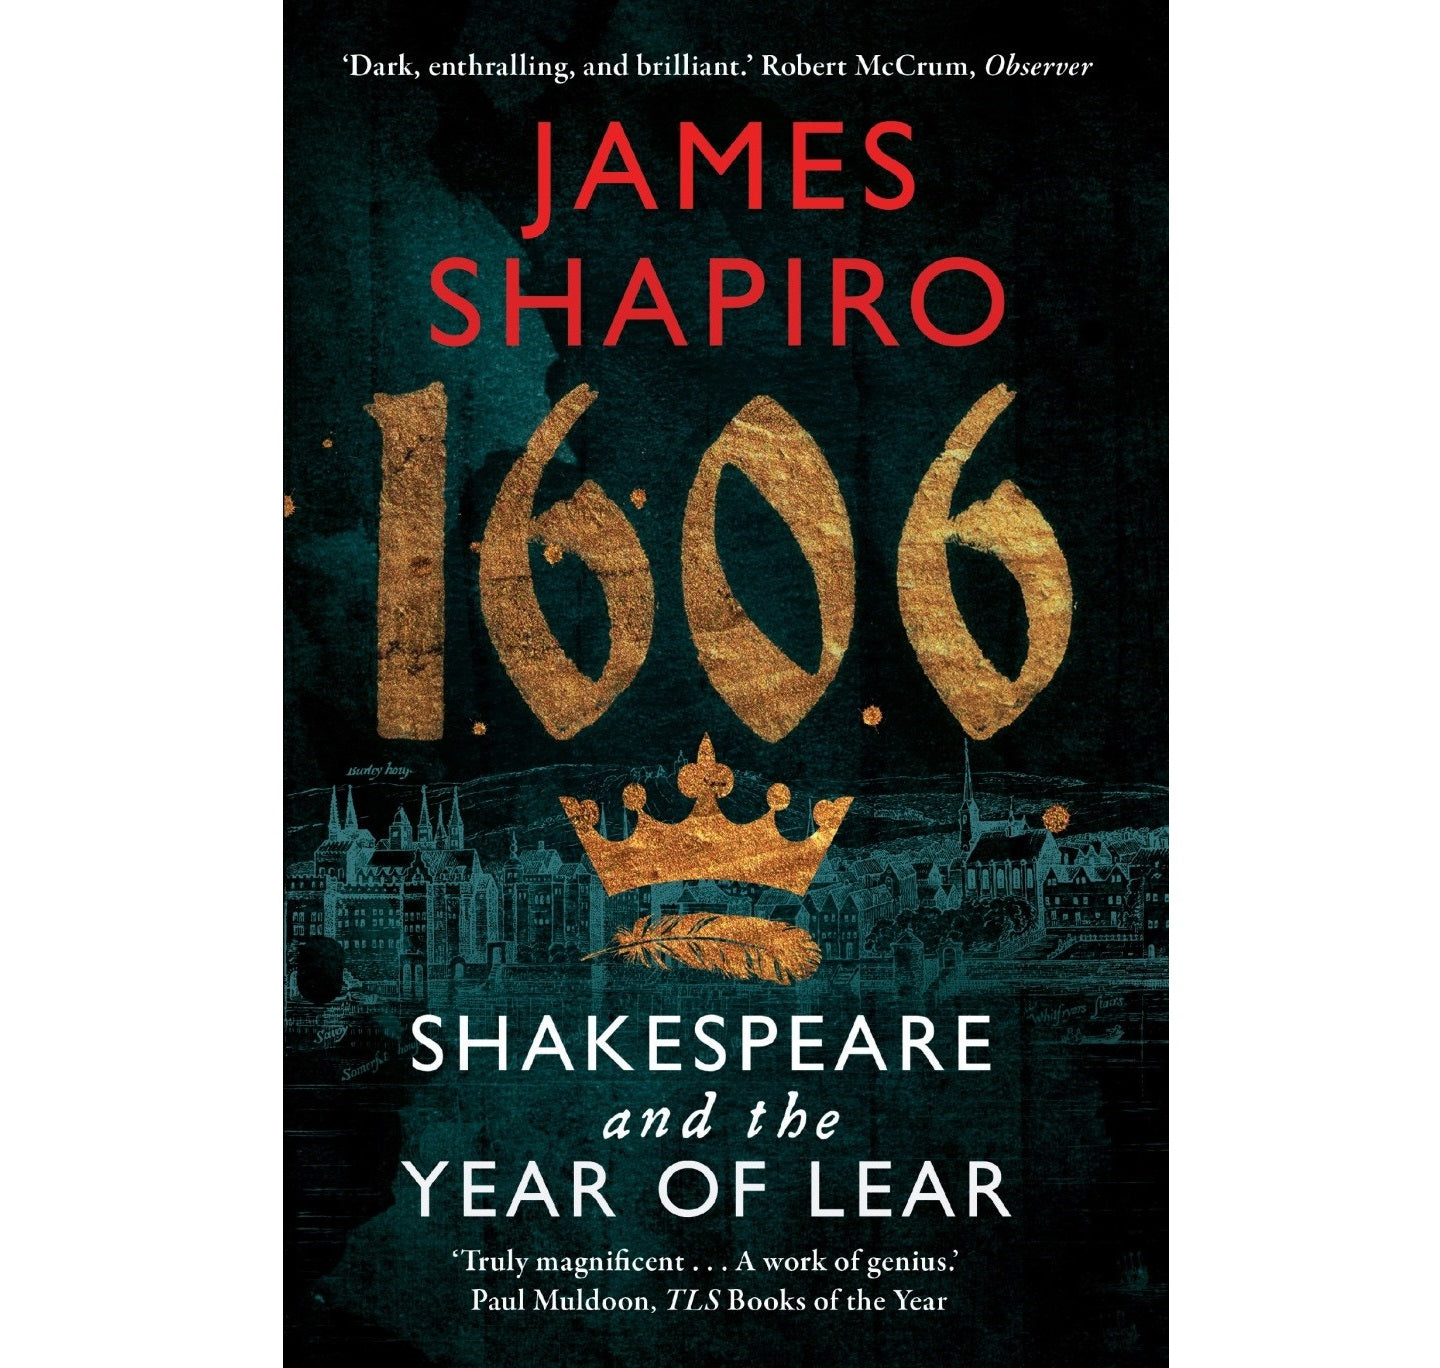 1606: Shakespeare & the Year of Lear PB